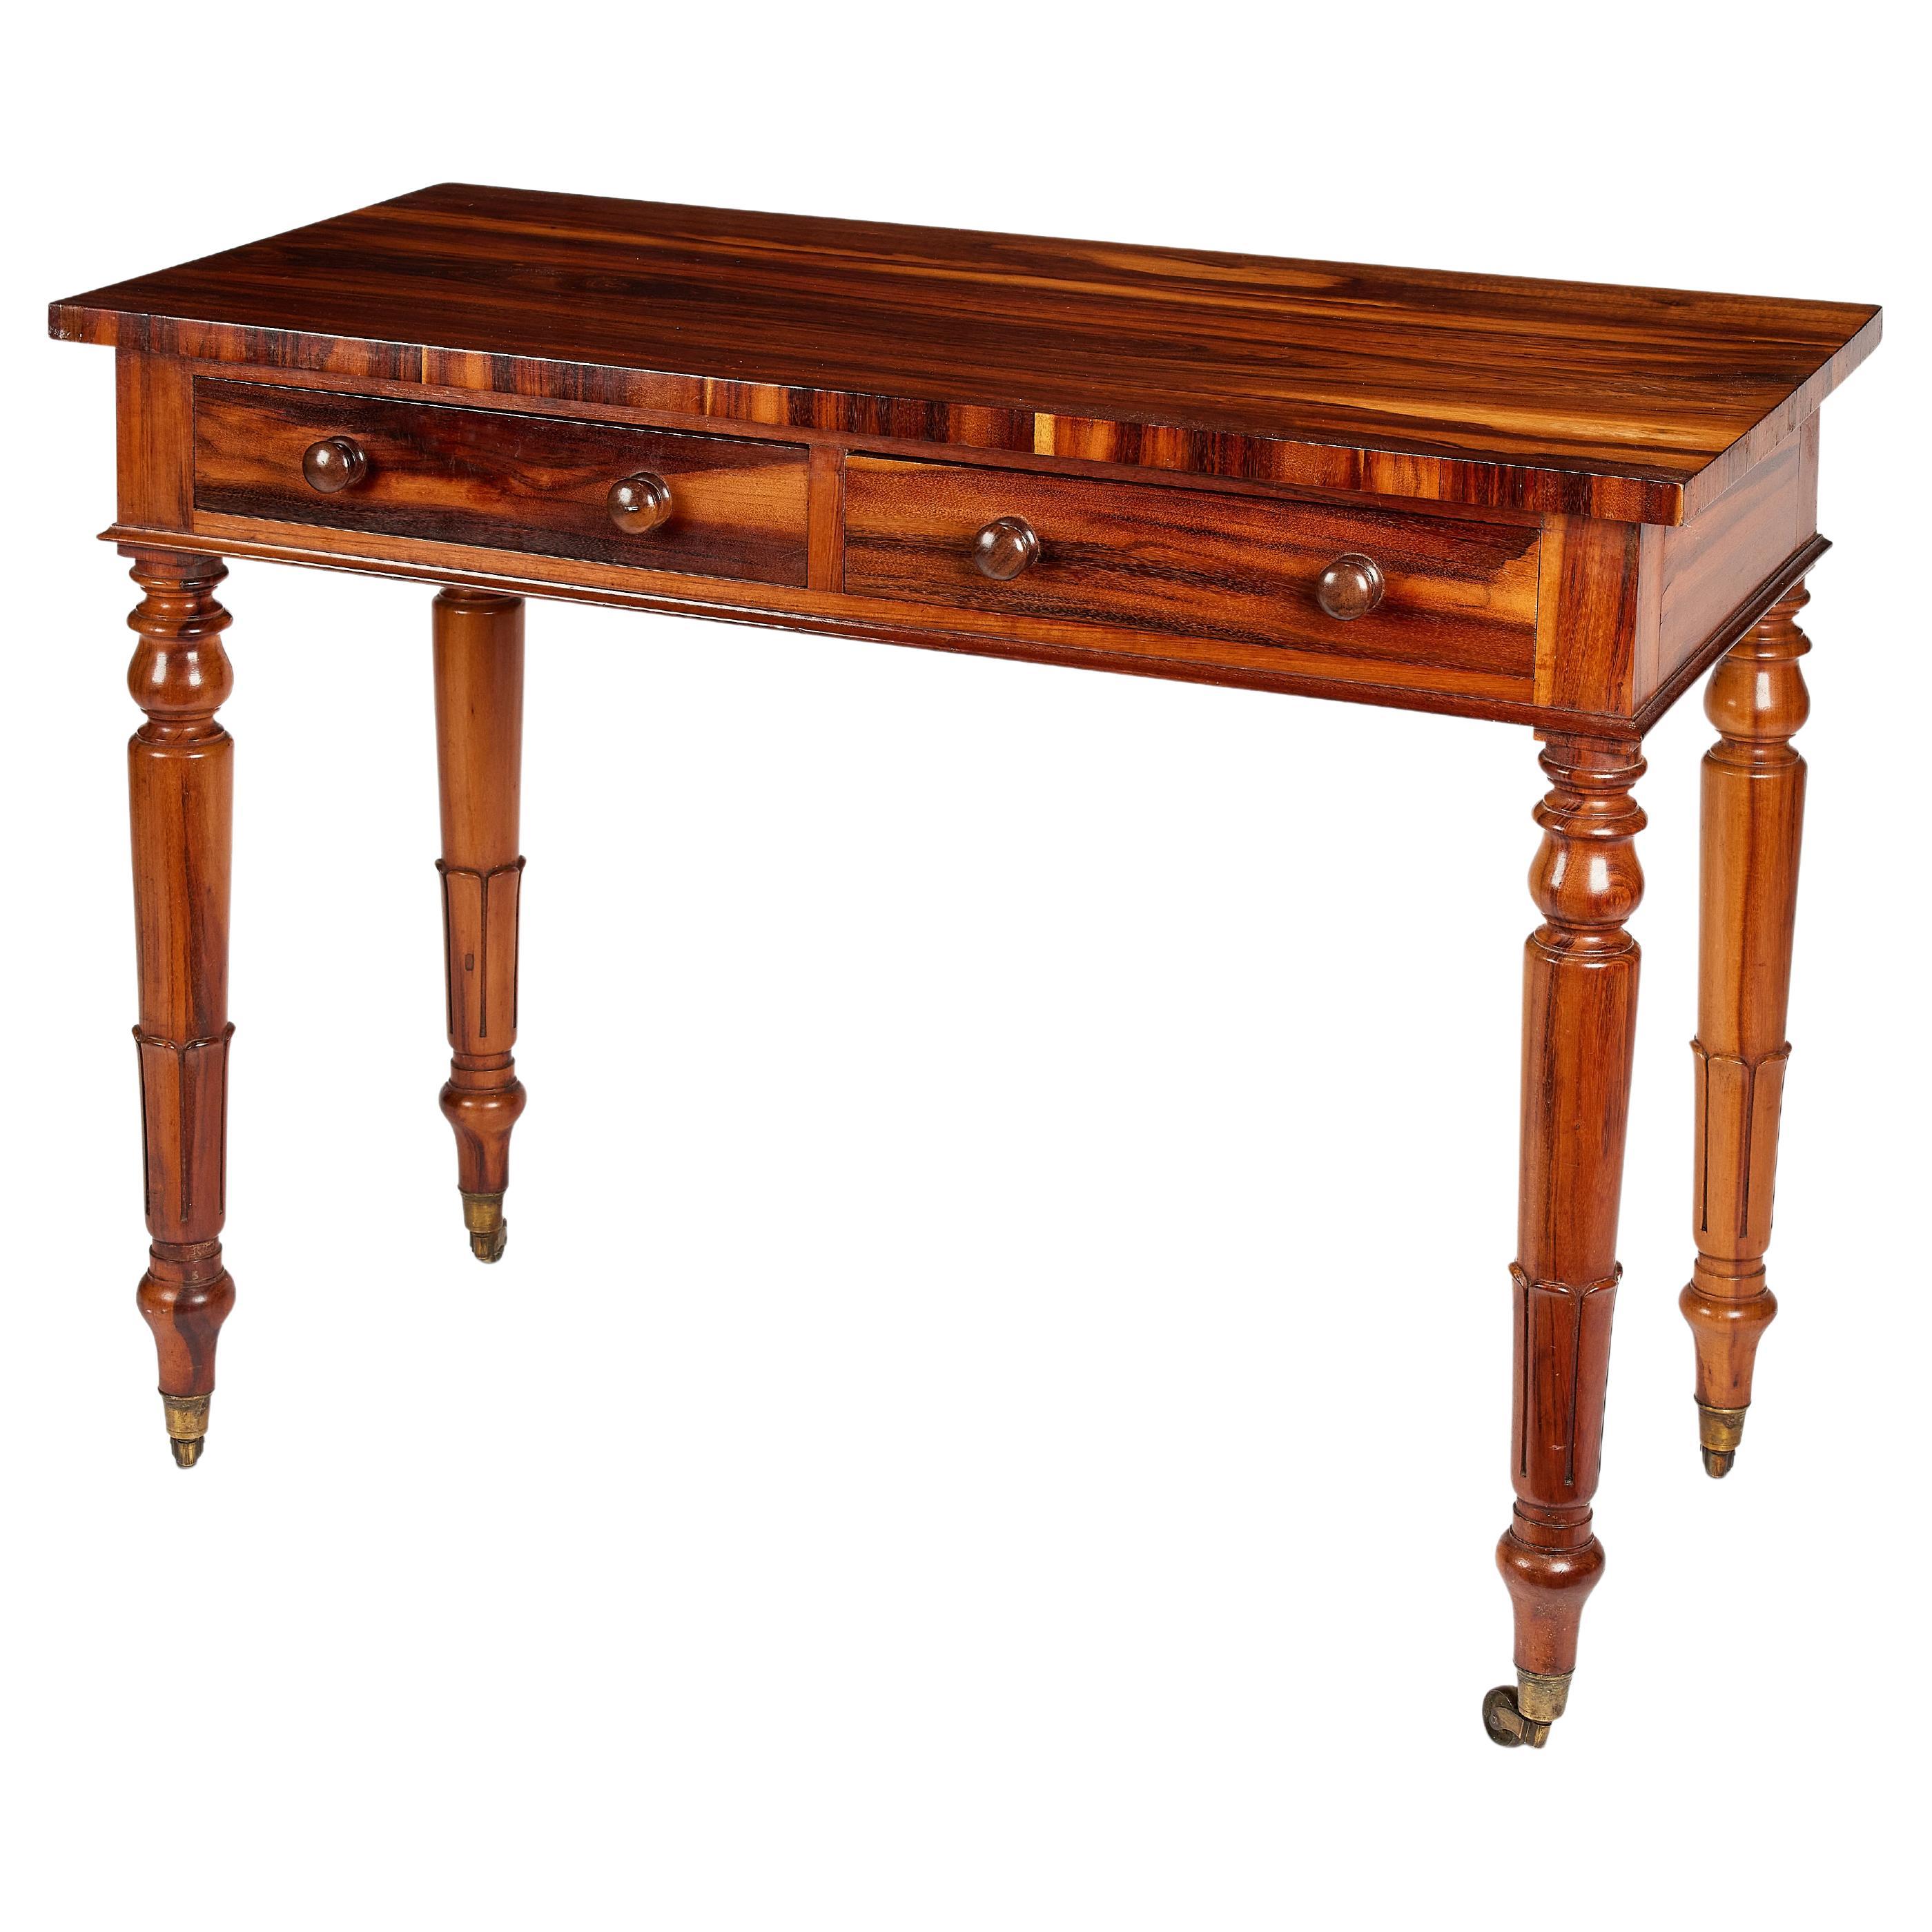 A William IV coramandel side table